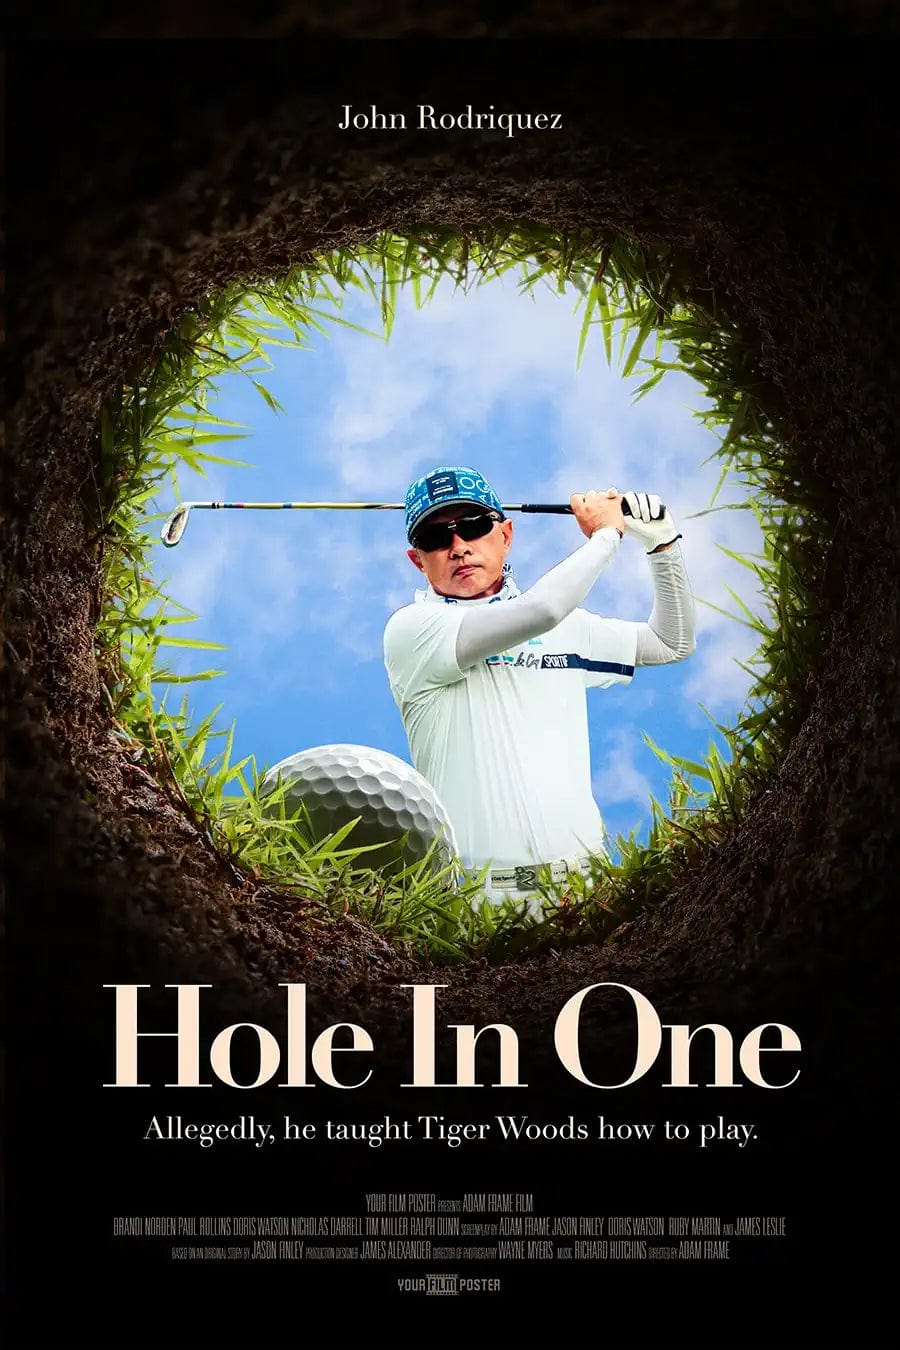 personalized movie poster in golf style